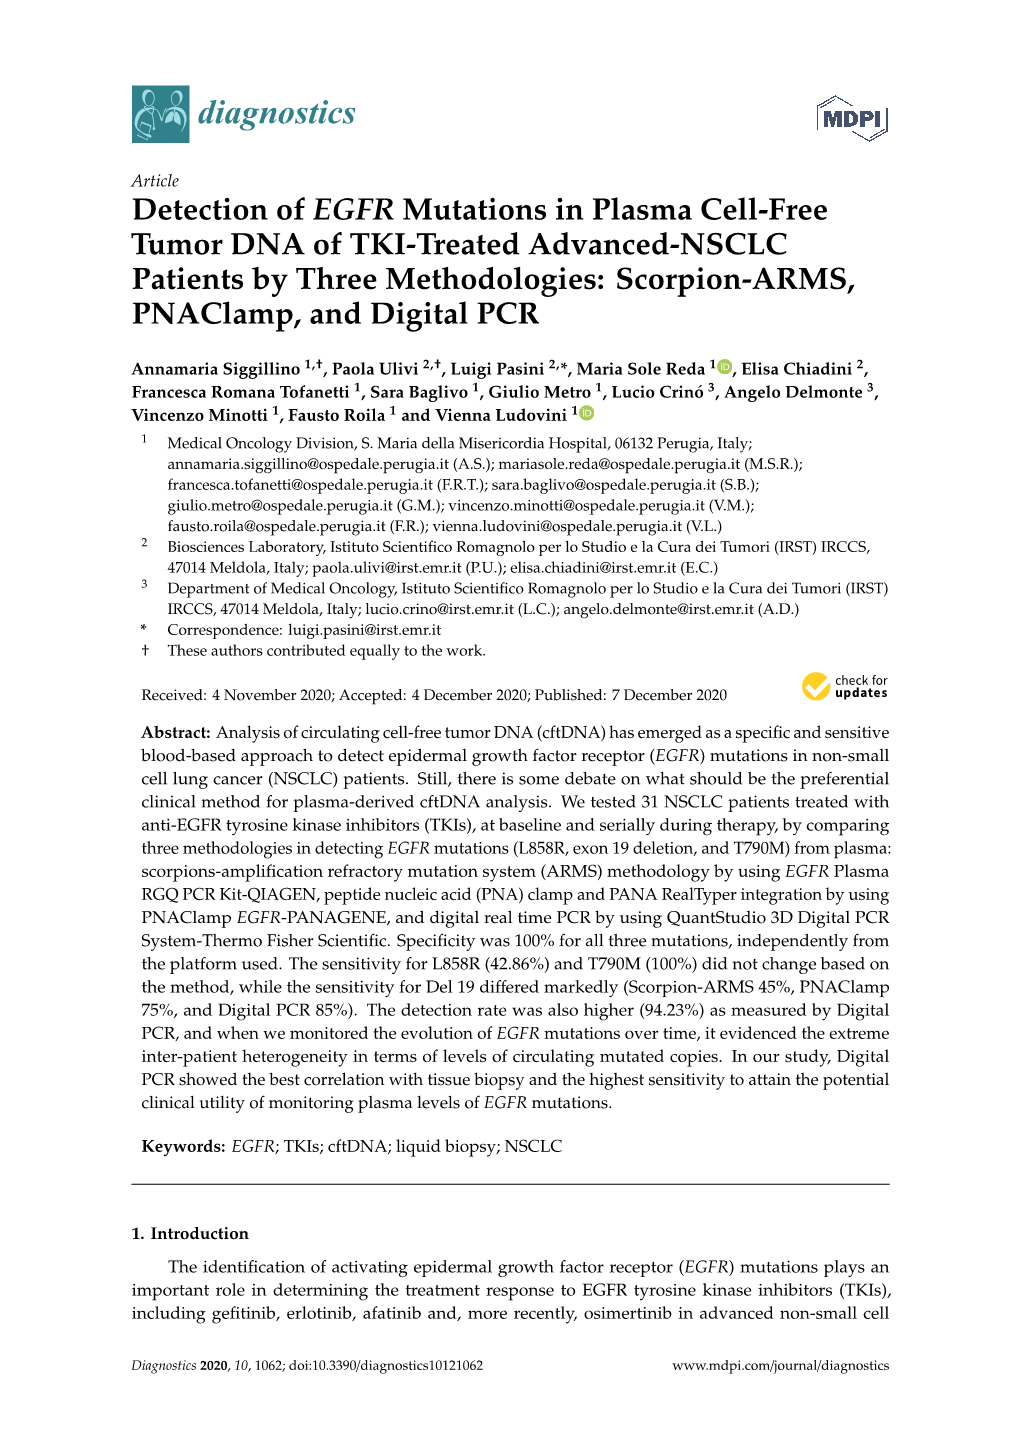 Detection of EGFR Mutations in Plasma Cell-Free Tumor DNA of TKI-Treated Advanced-NSCLC Patients by Three Methodologies: Scorpion-ARMS, Pnaclamp, and Digital PCR